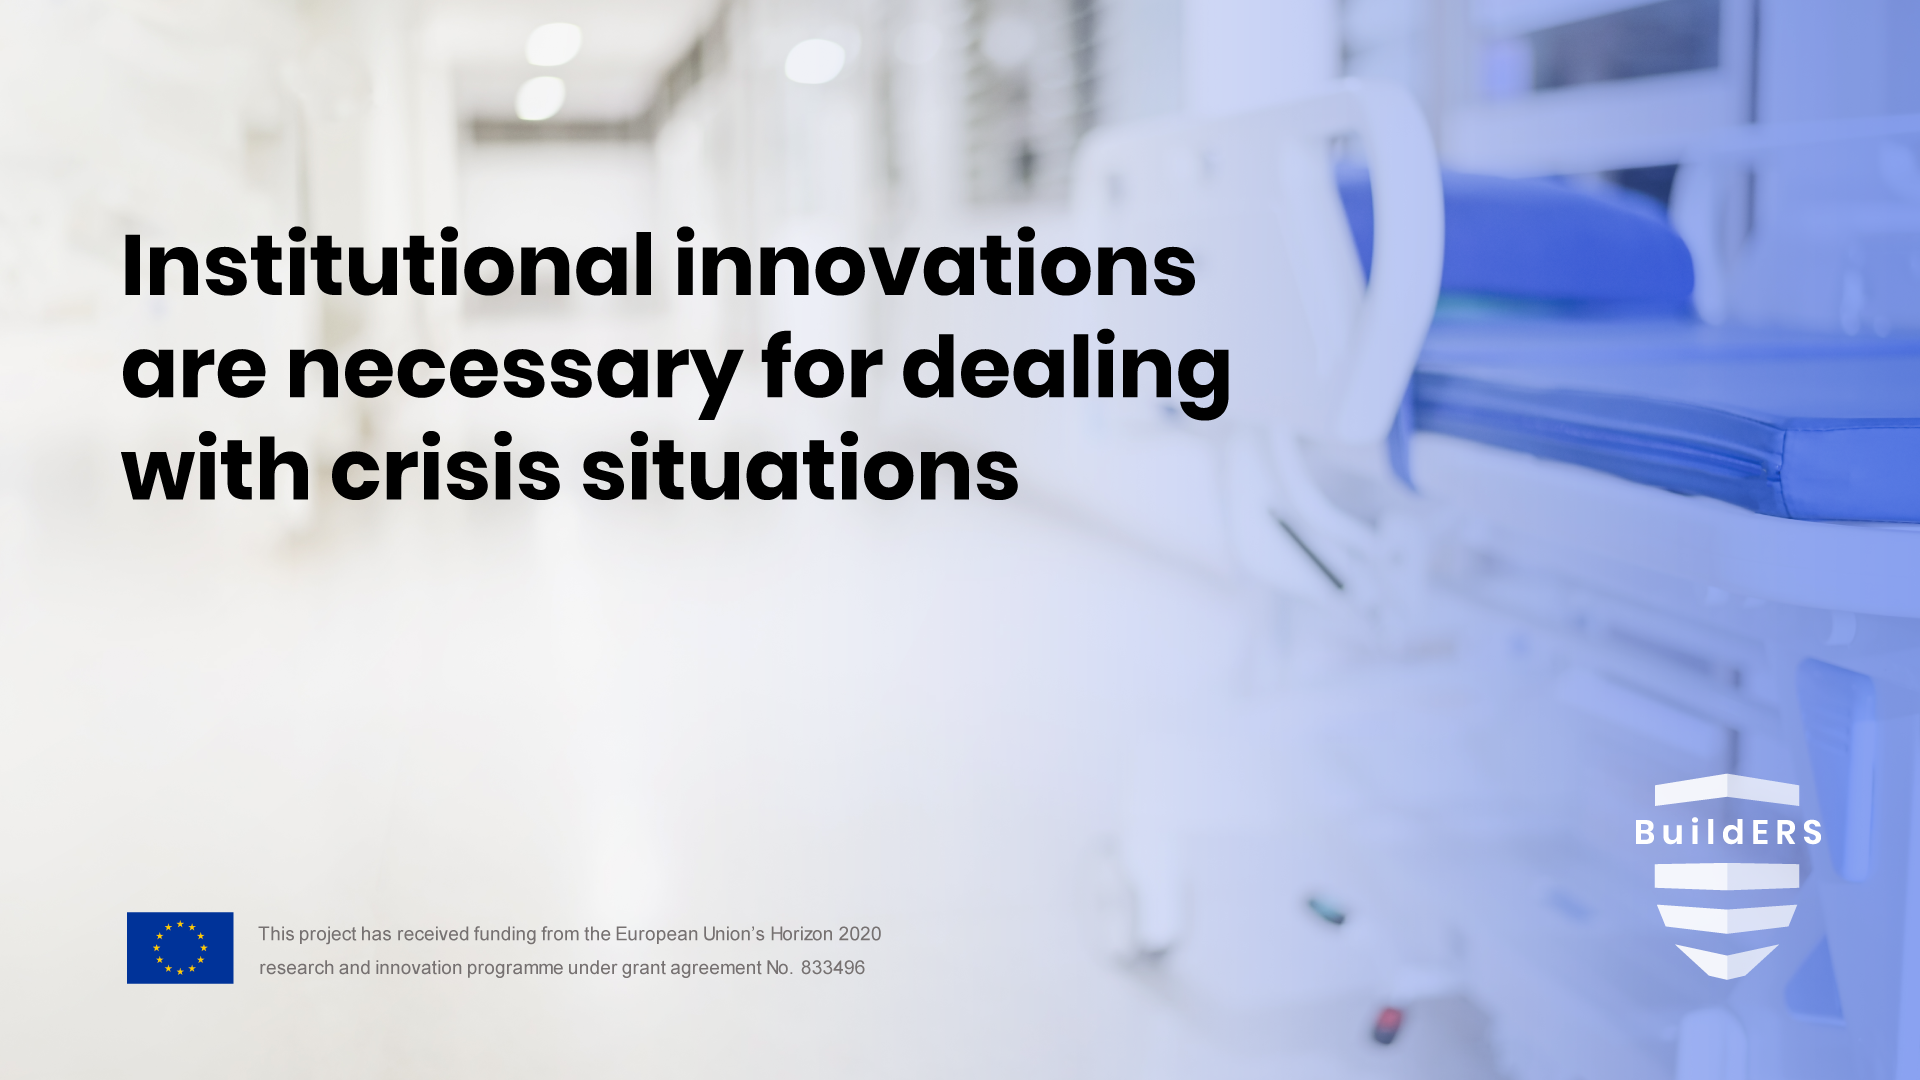 Institutional innovations are necessary for dealing with crisis situations